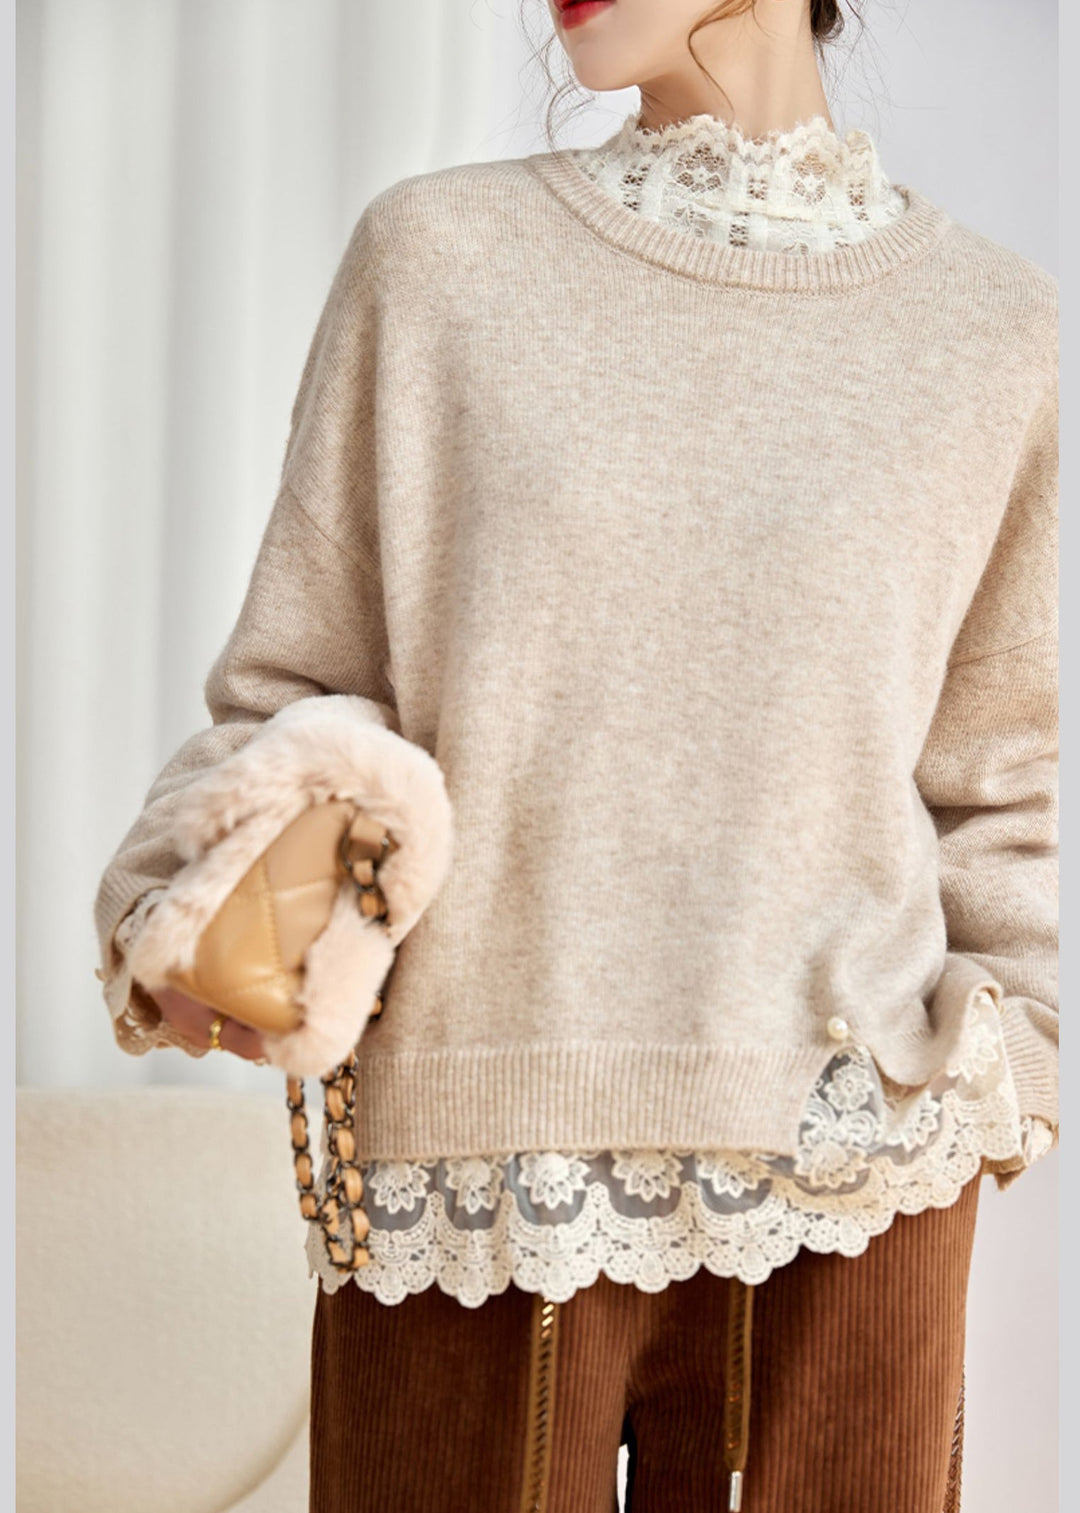 Beige Cozy Patchwork Cotton Knit Tops O Neck Long Sleeve